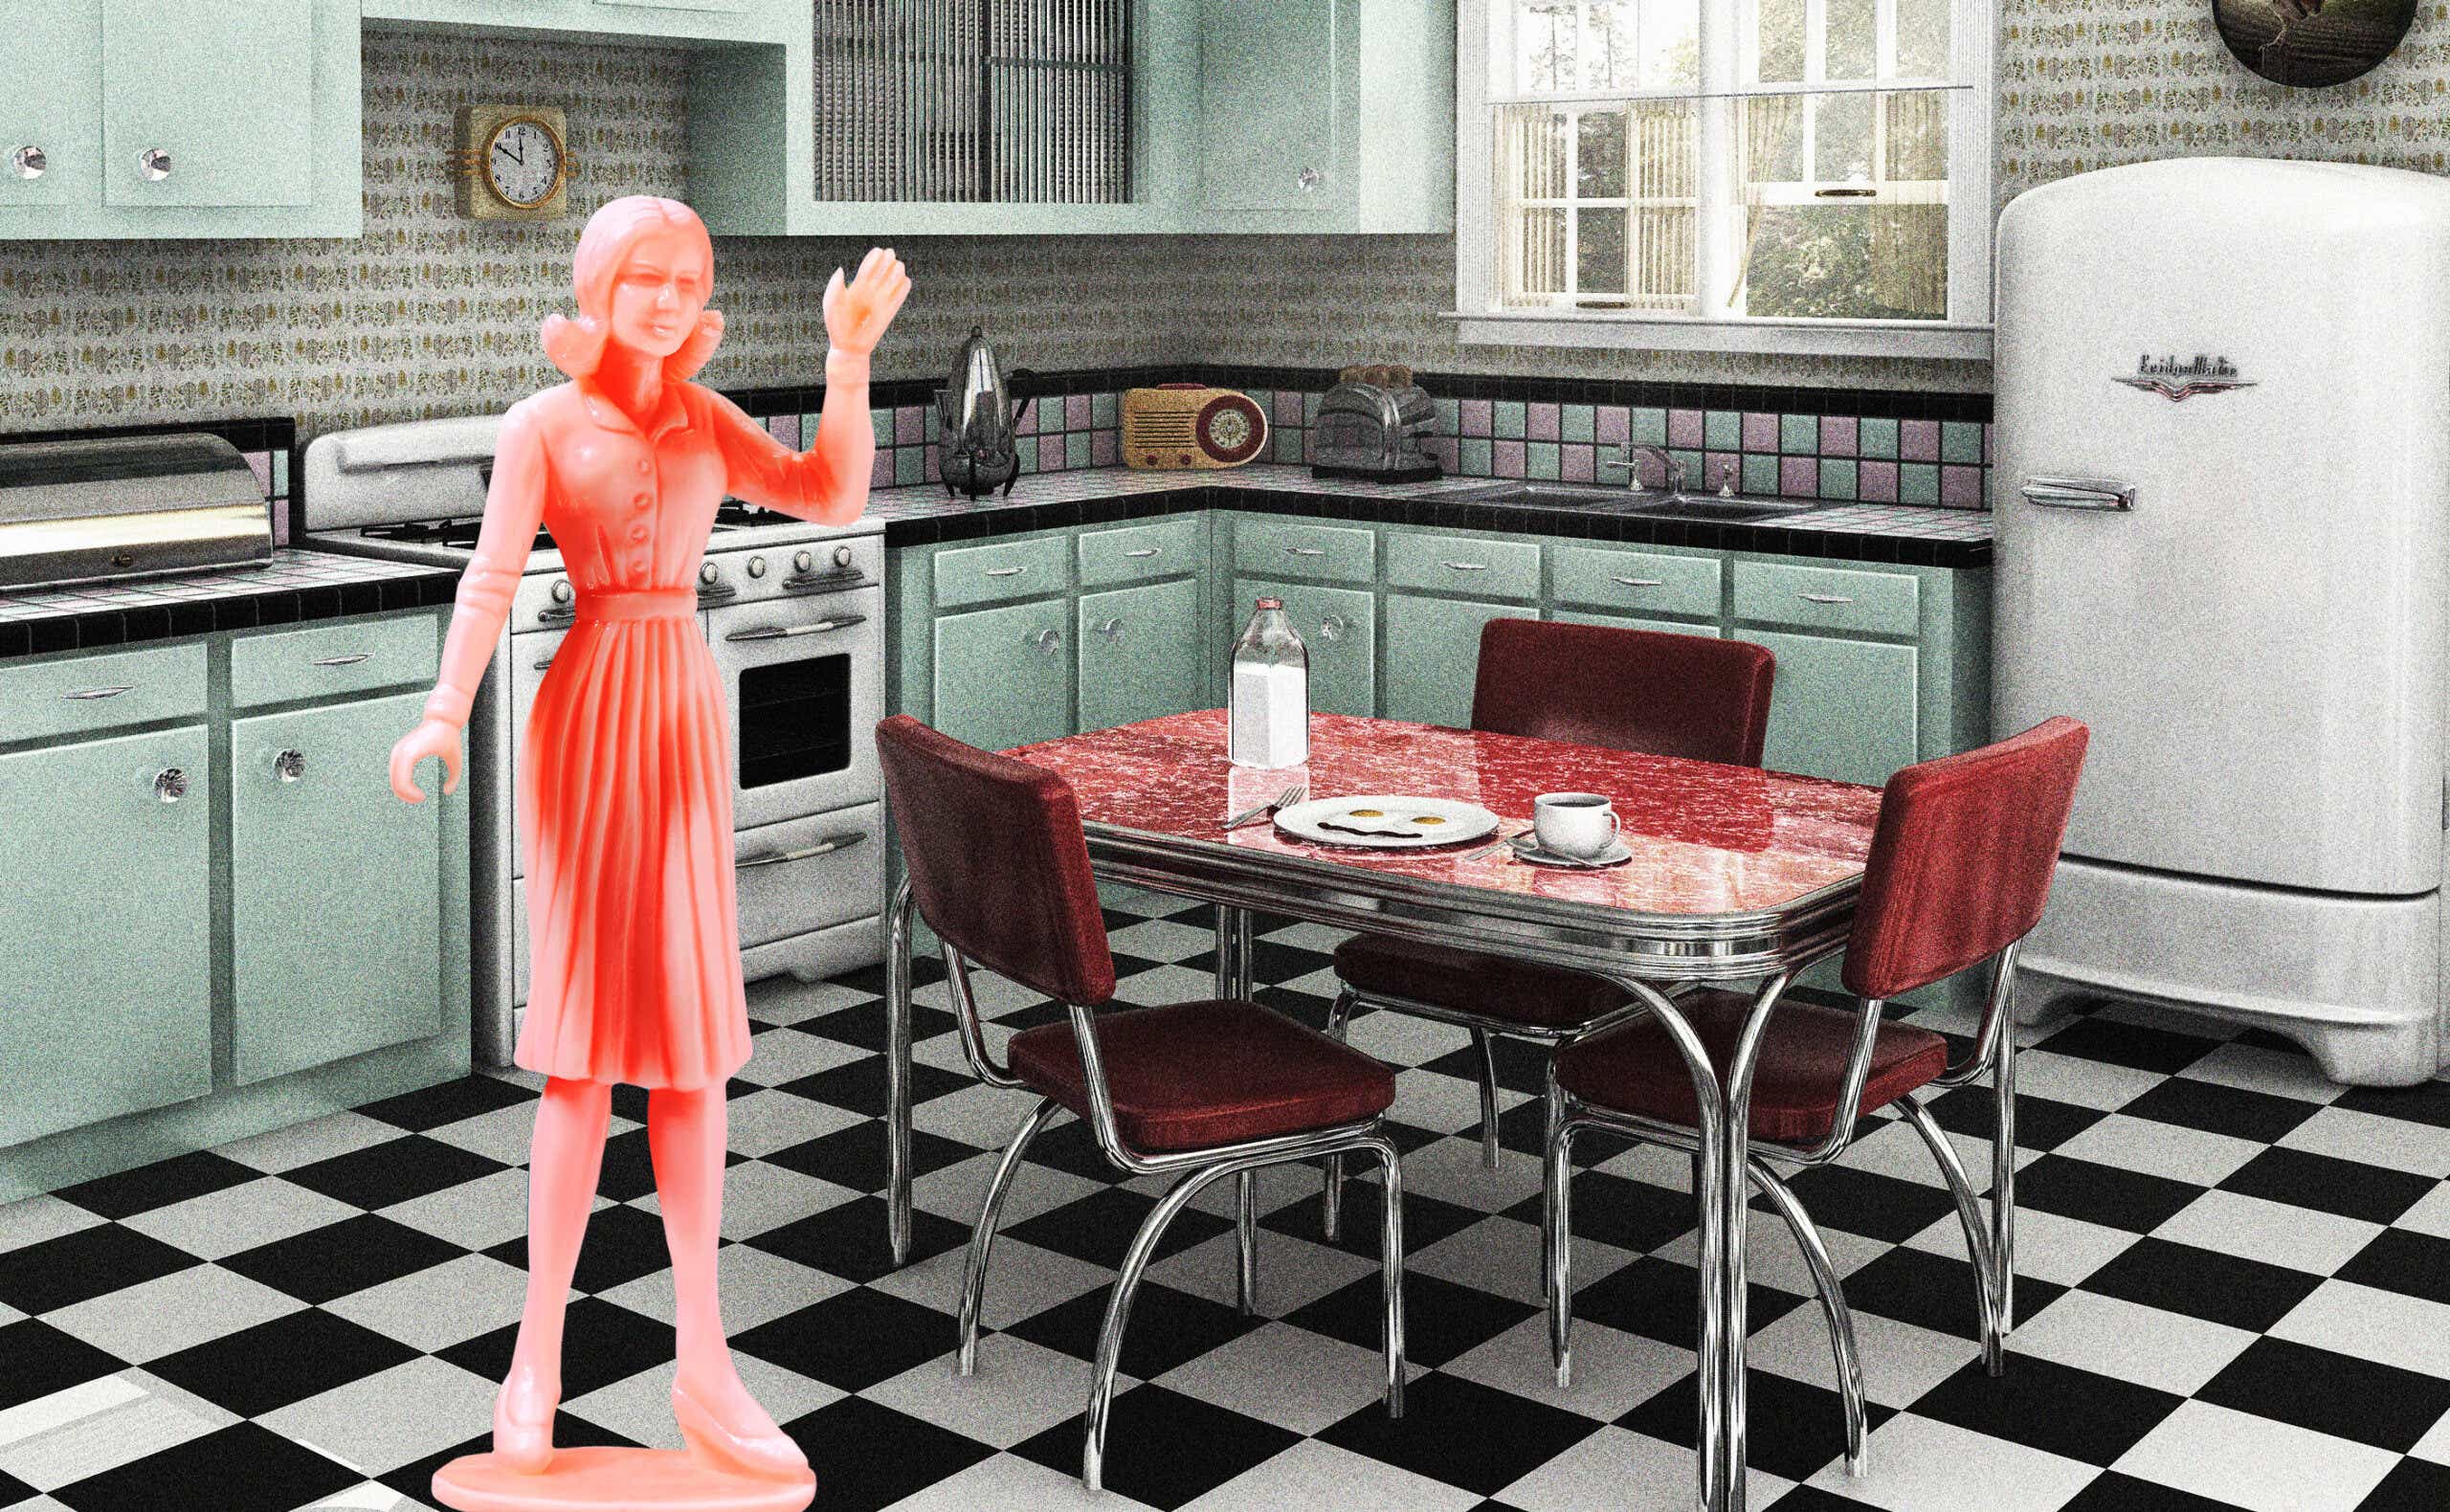 a plastic figurine of a woman in a 1950s kitchen